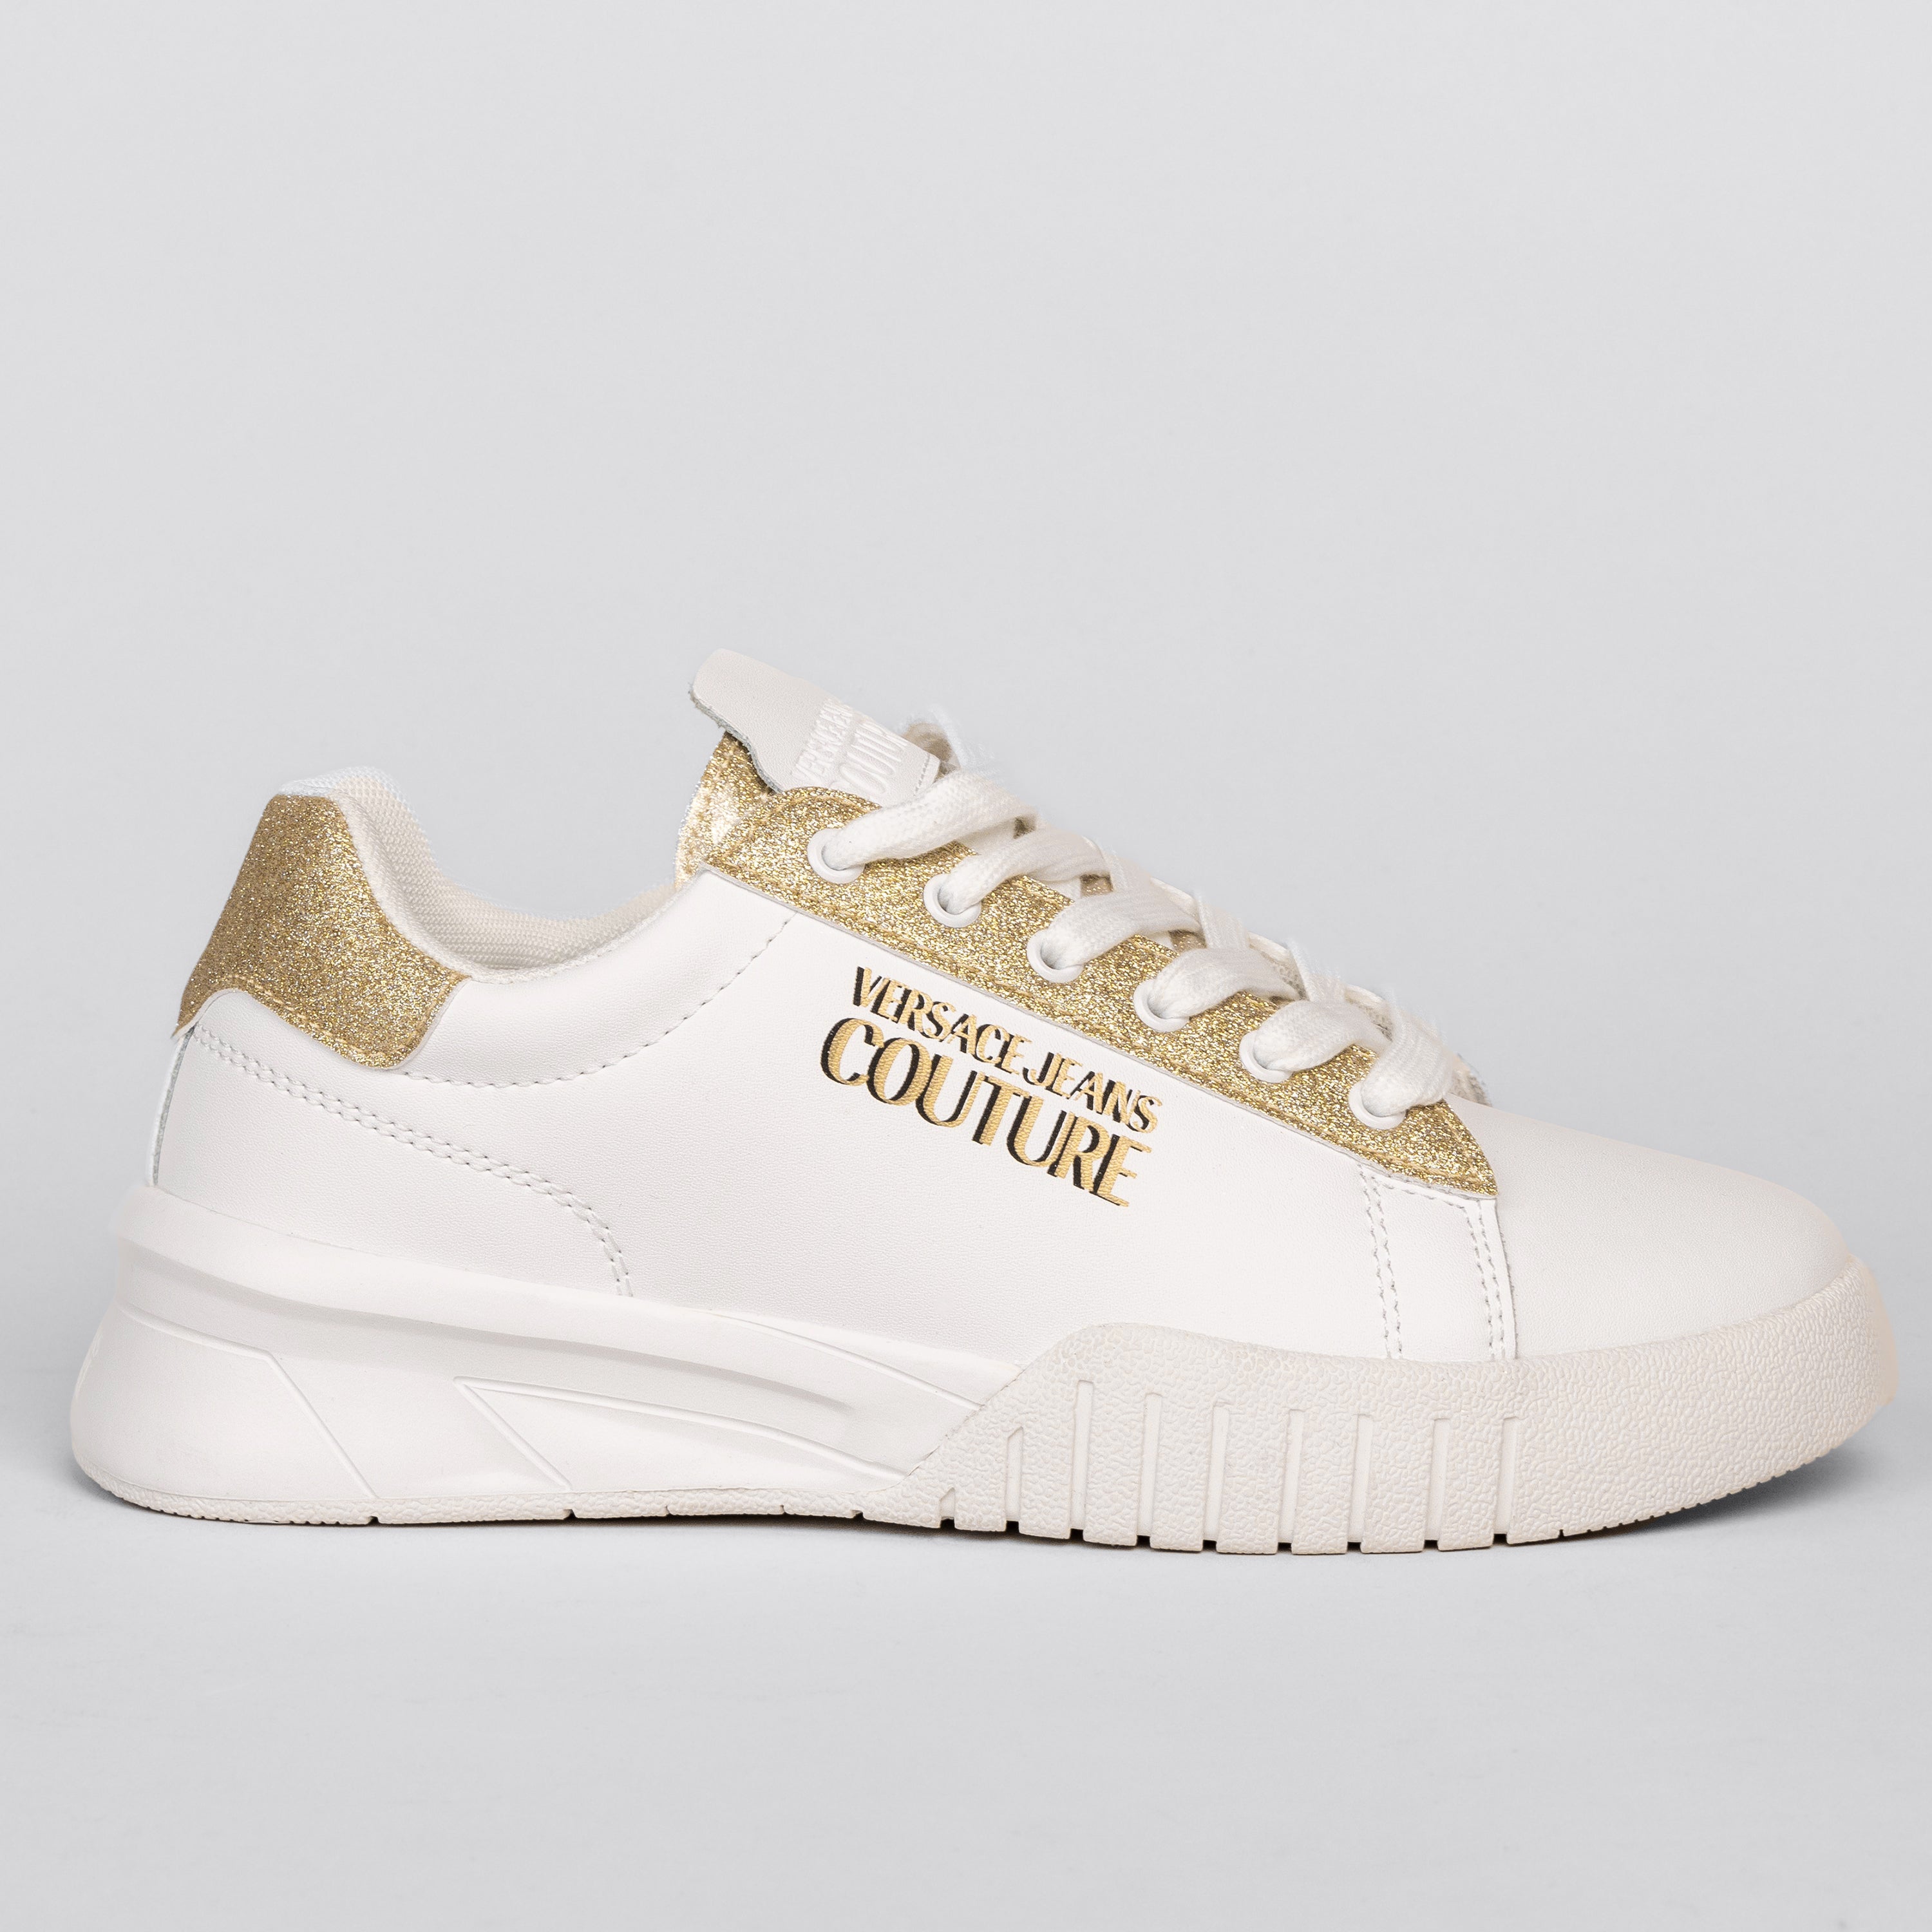 Sneakers Blanco Versace Couture Glitter